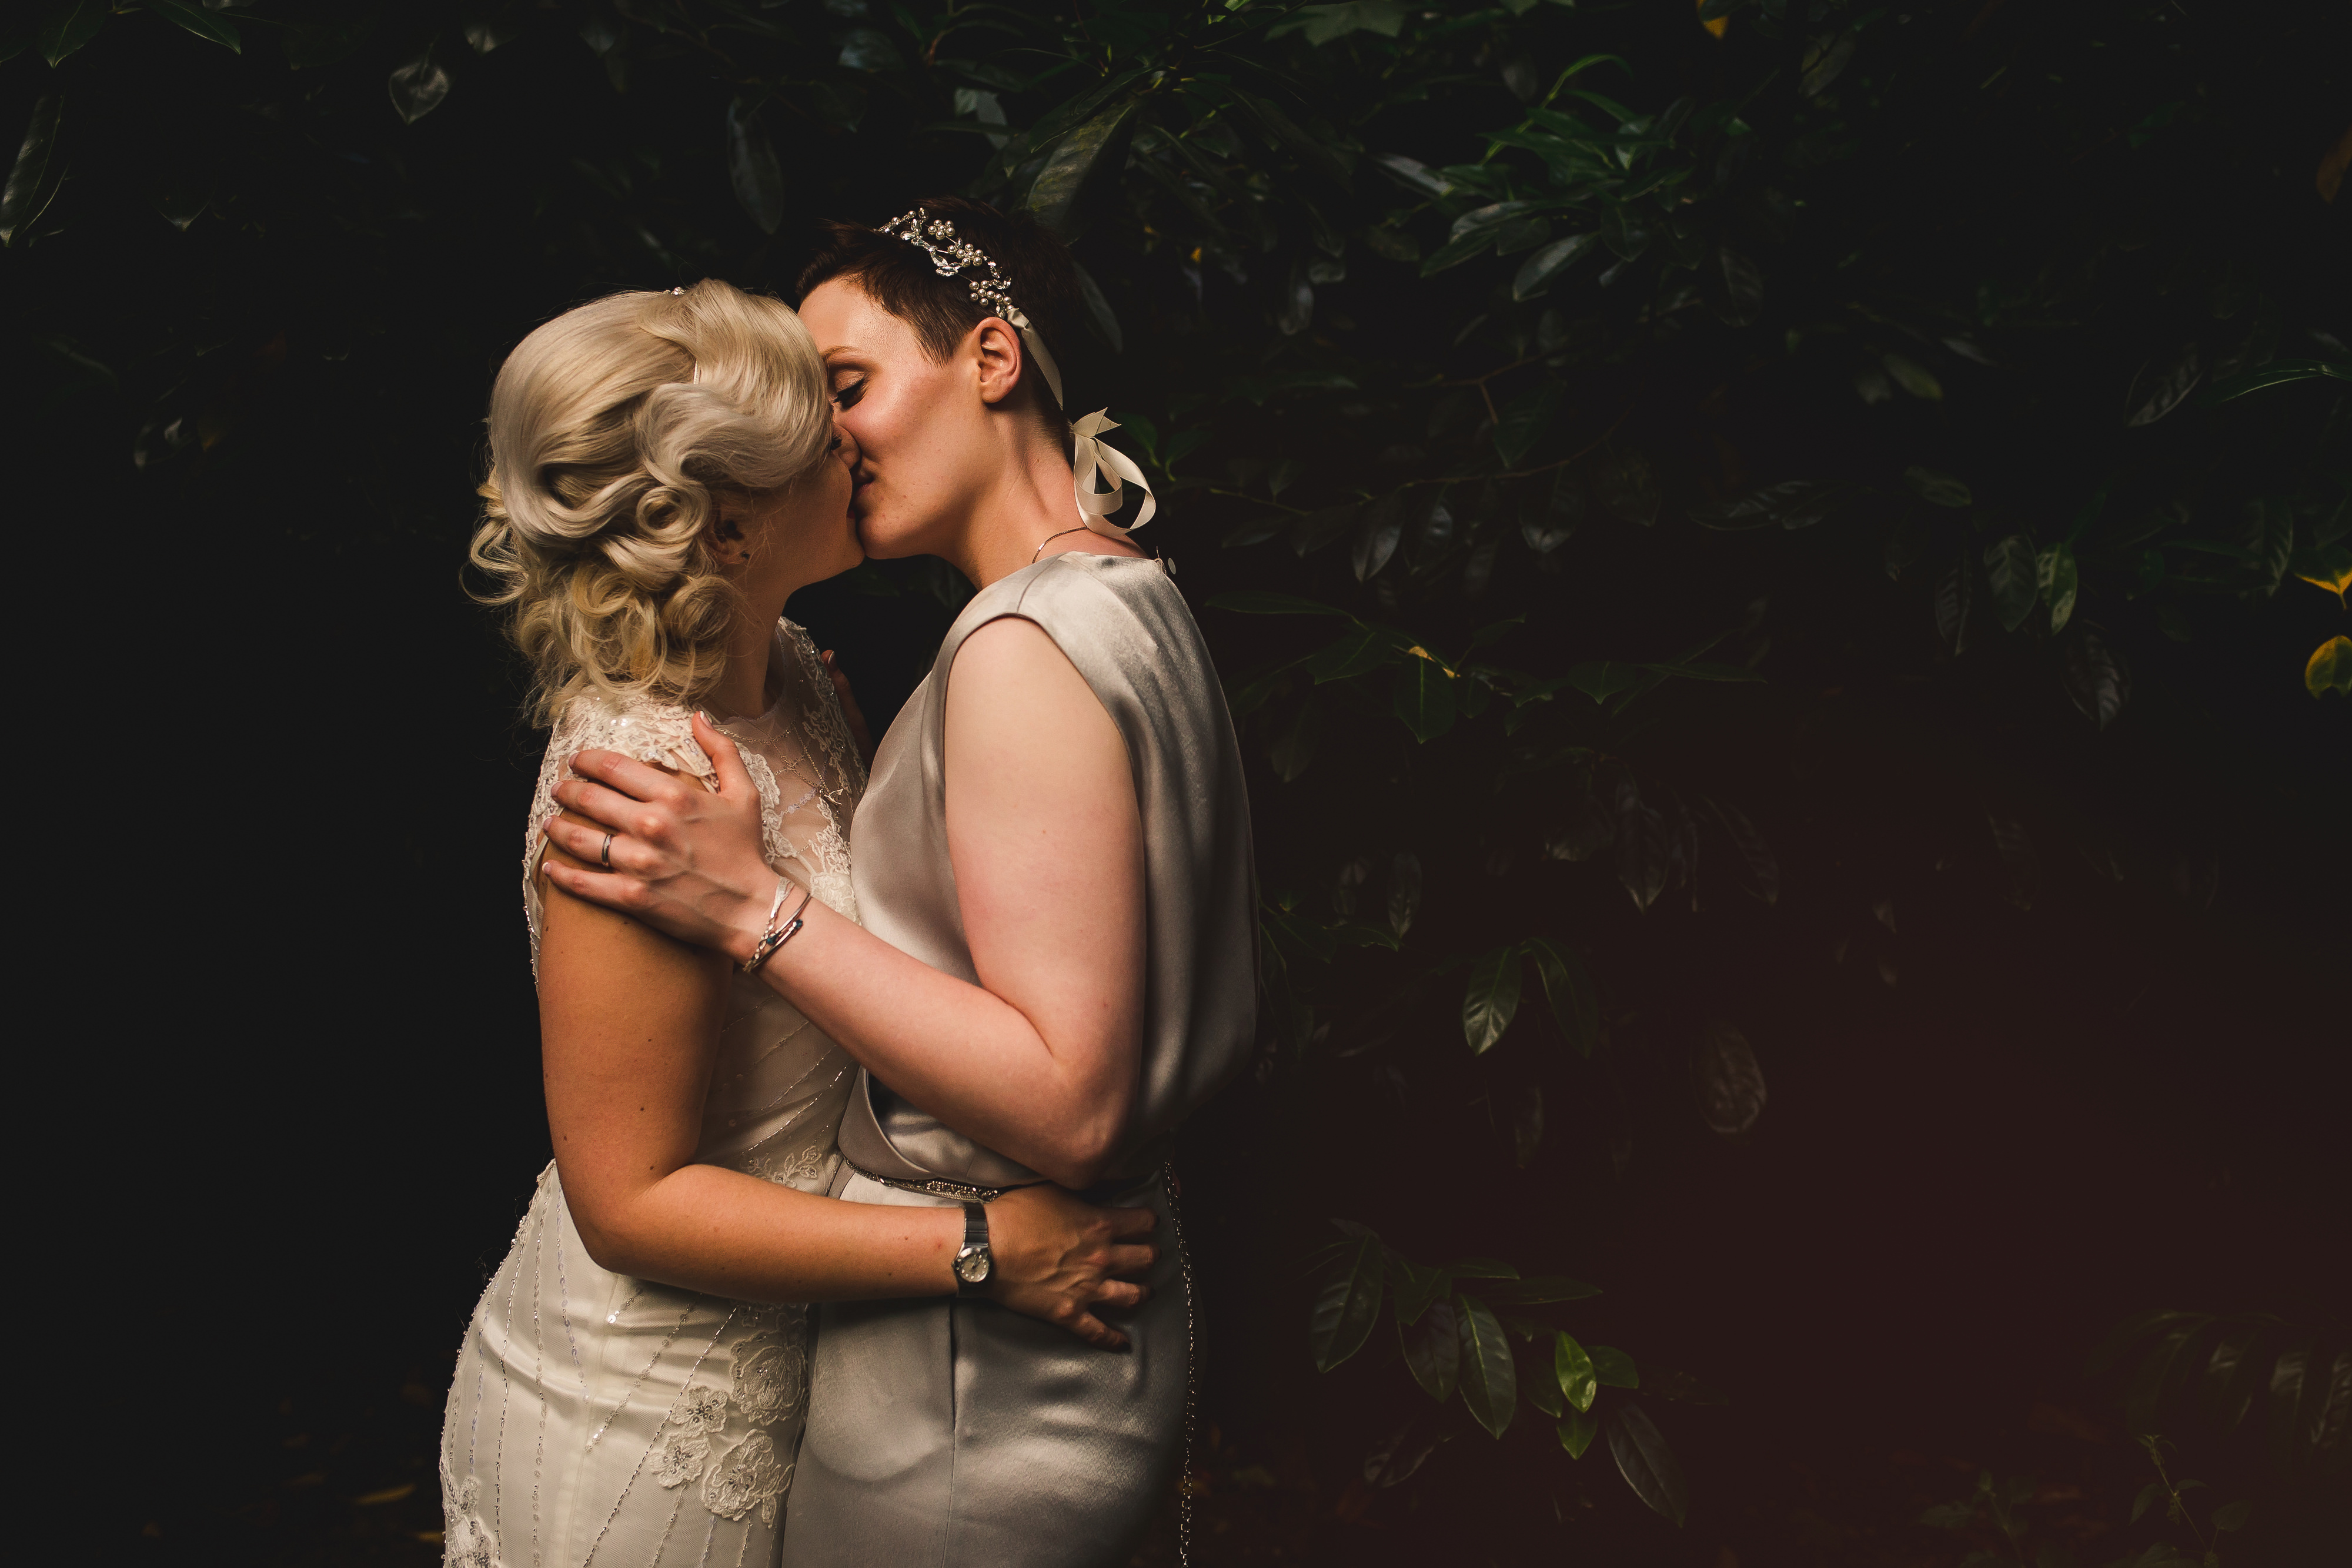 Modern DIY Wedding at Theobolds Estate with A Dress A Jumpsuit and Lots of Personal Touches